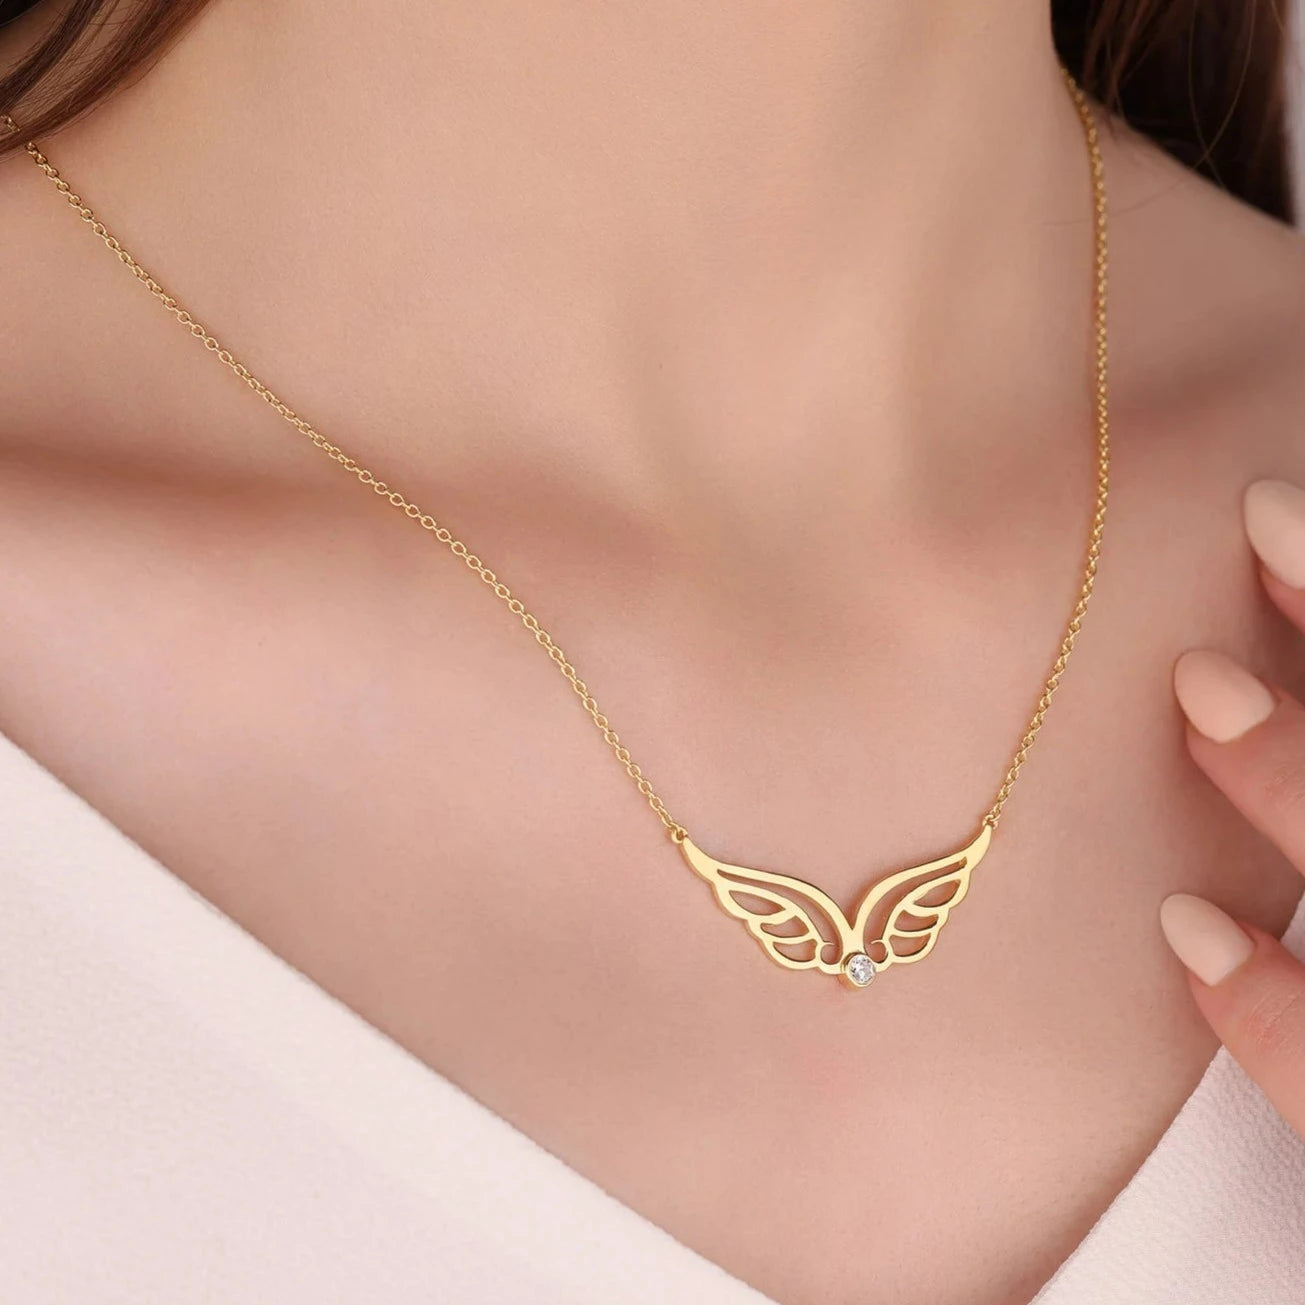 18 carat gold Angel Wings Birthstone Necklace - Burst of Arabia - UAE18 carat gold Angel Wings Birthstone Necklace - Burst of Arabia - UAE